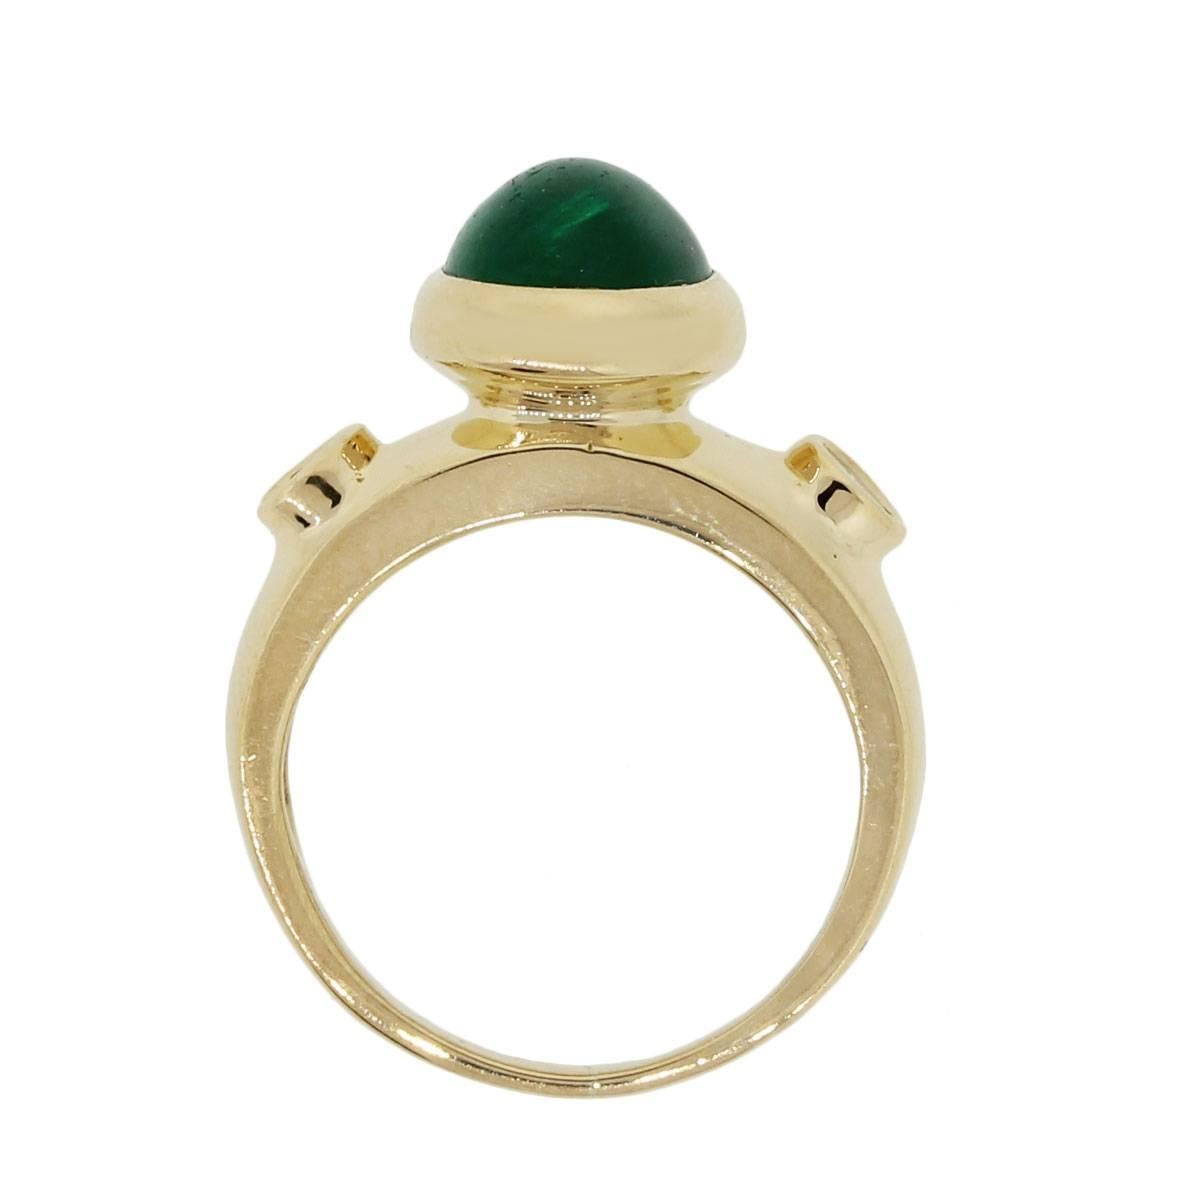 Material: 18k yellow gold
Diamond Details: Approximately 0.20ctw round brilliant diamonds. Diamonds are G/H in color and VS in clarity
Gemstone Details: Oval cabochon green emerald measuring approximately  9.75mm x 7.69mm
Ring Measurements: 1″ x